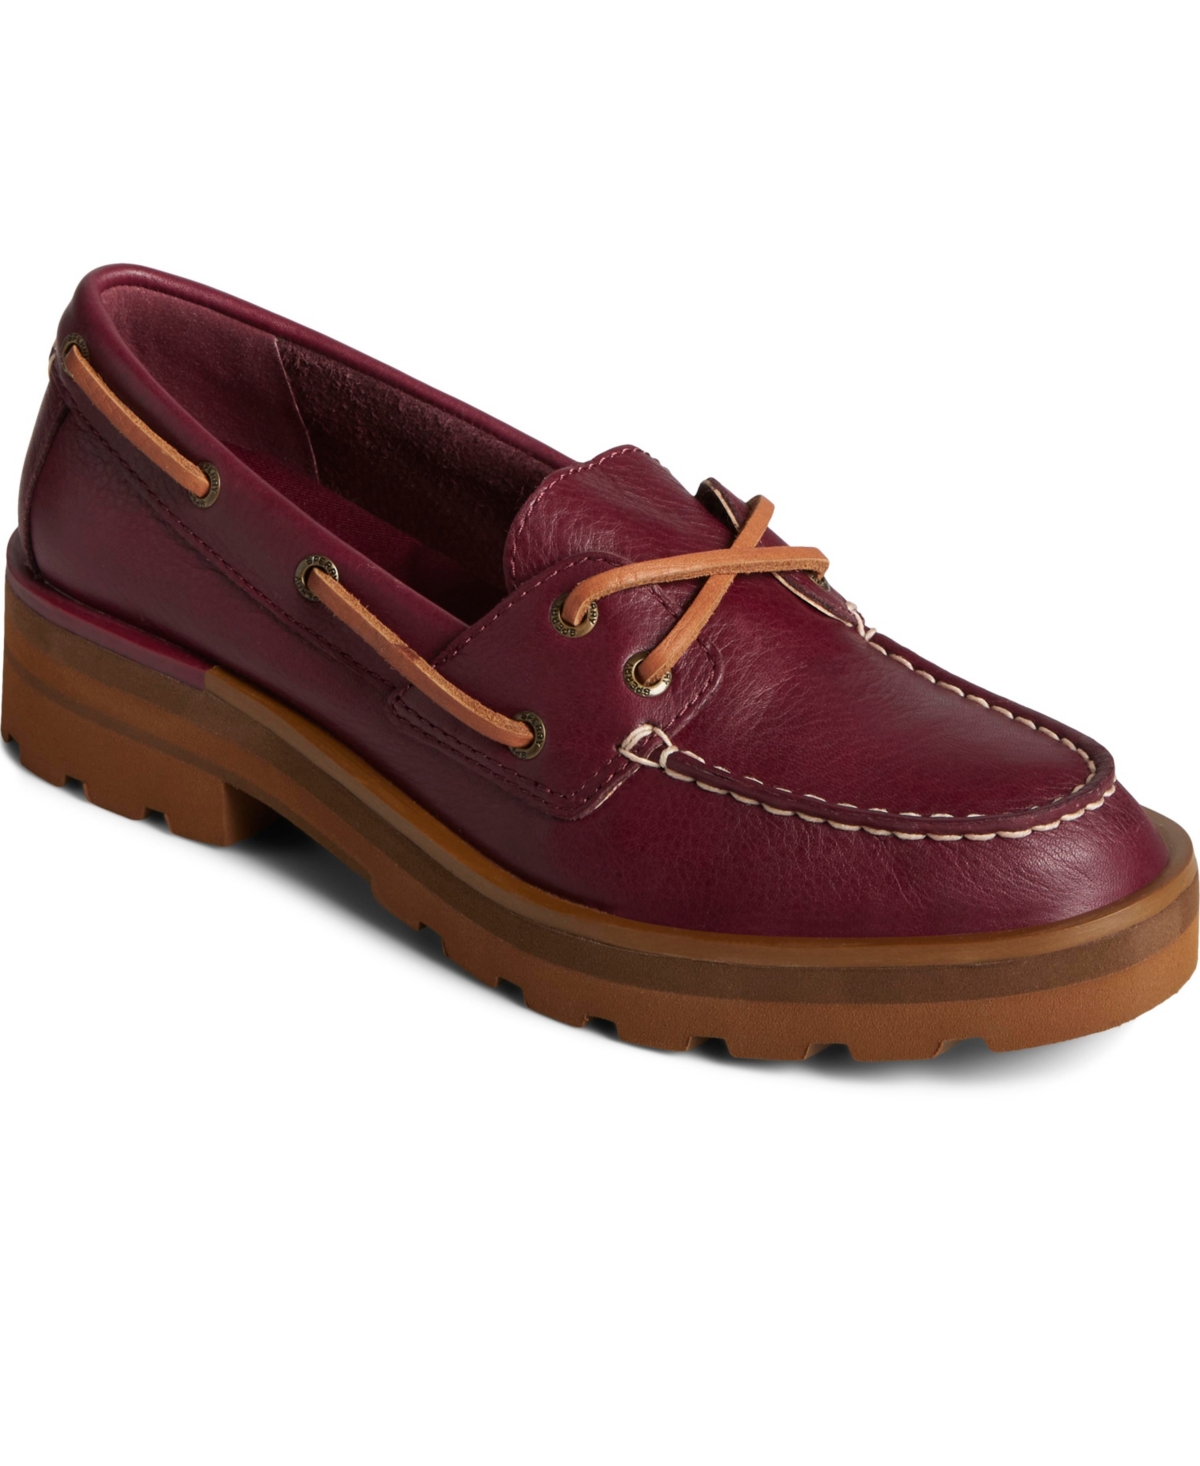 Women's Chunky Faux Leather Boat Shoes - Cordovan